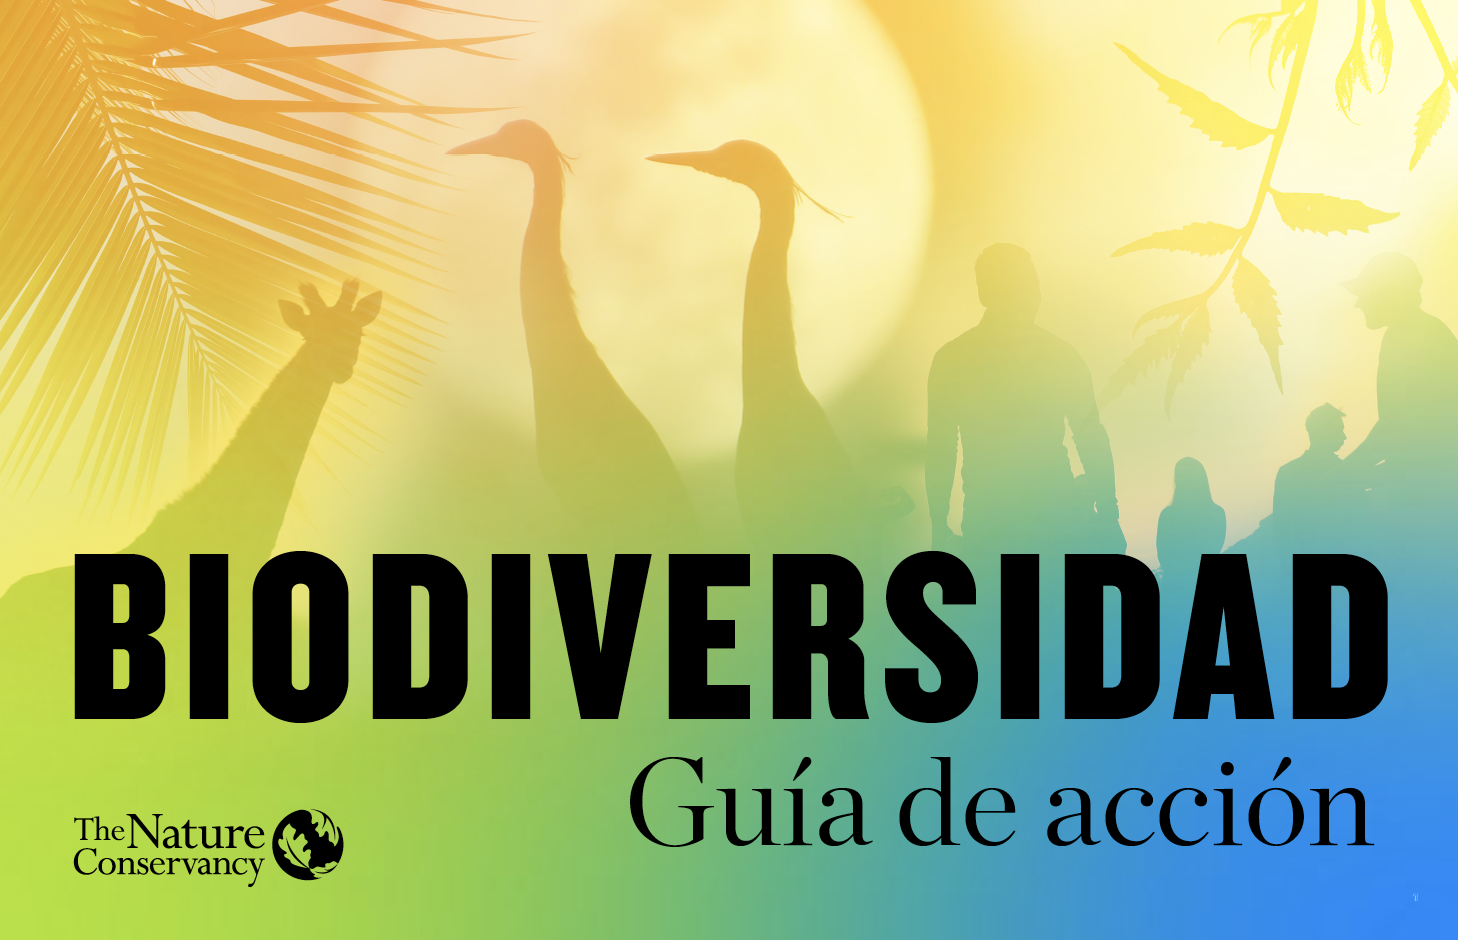 Cover of Spanish edition of Biodiversity Action Guide.